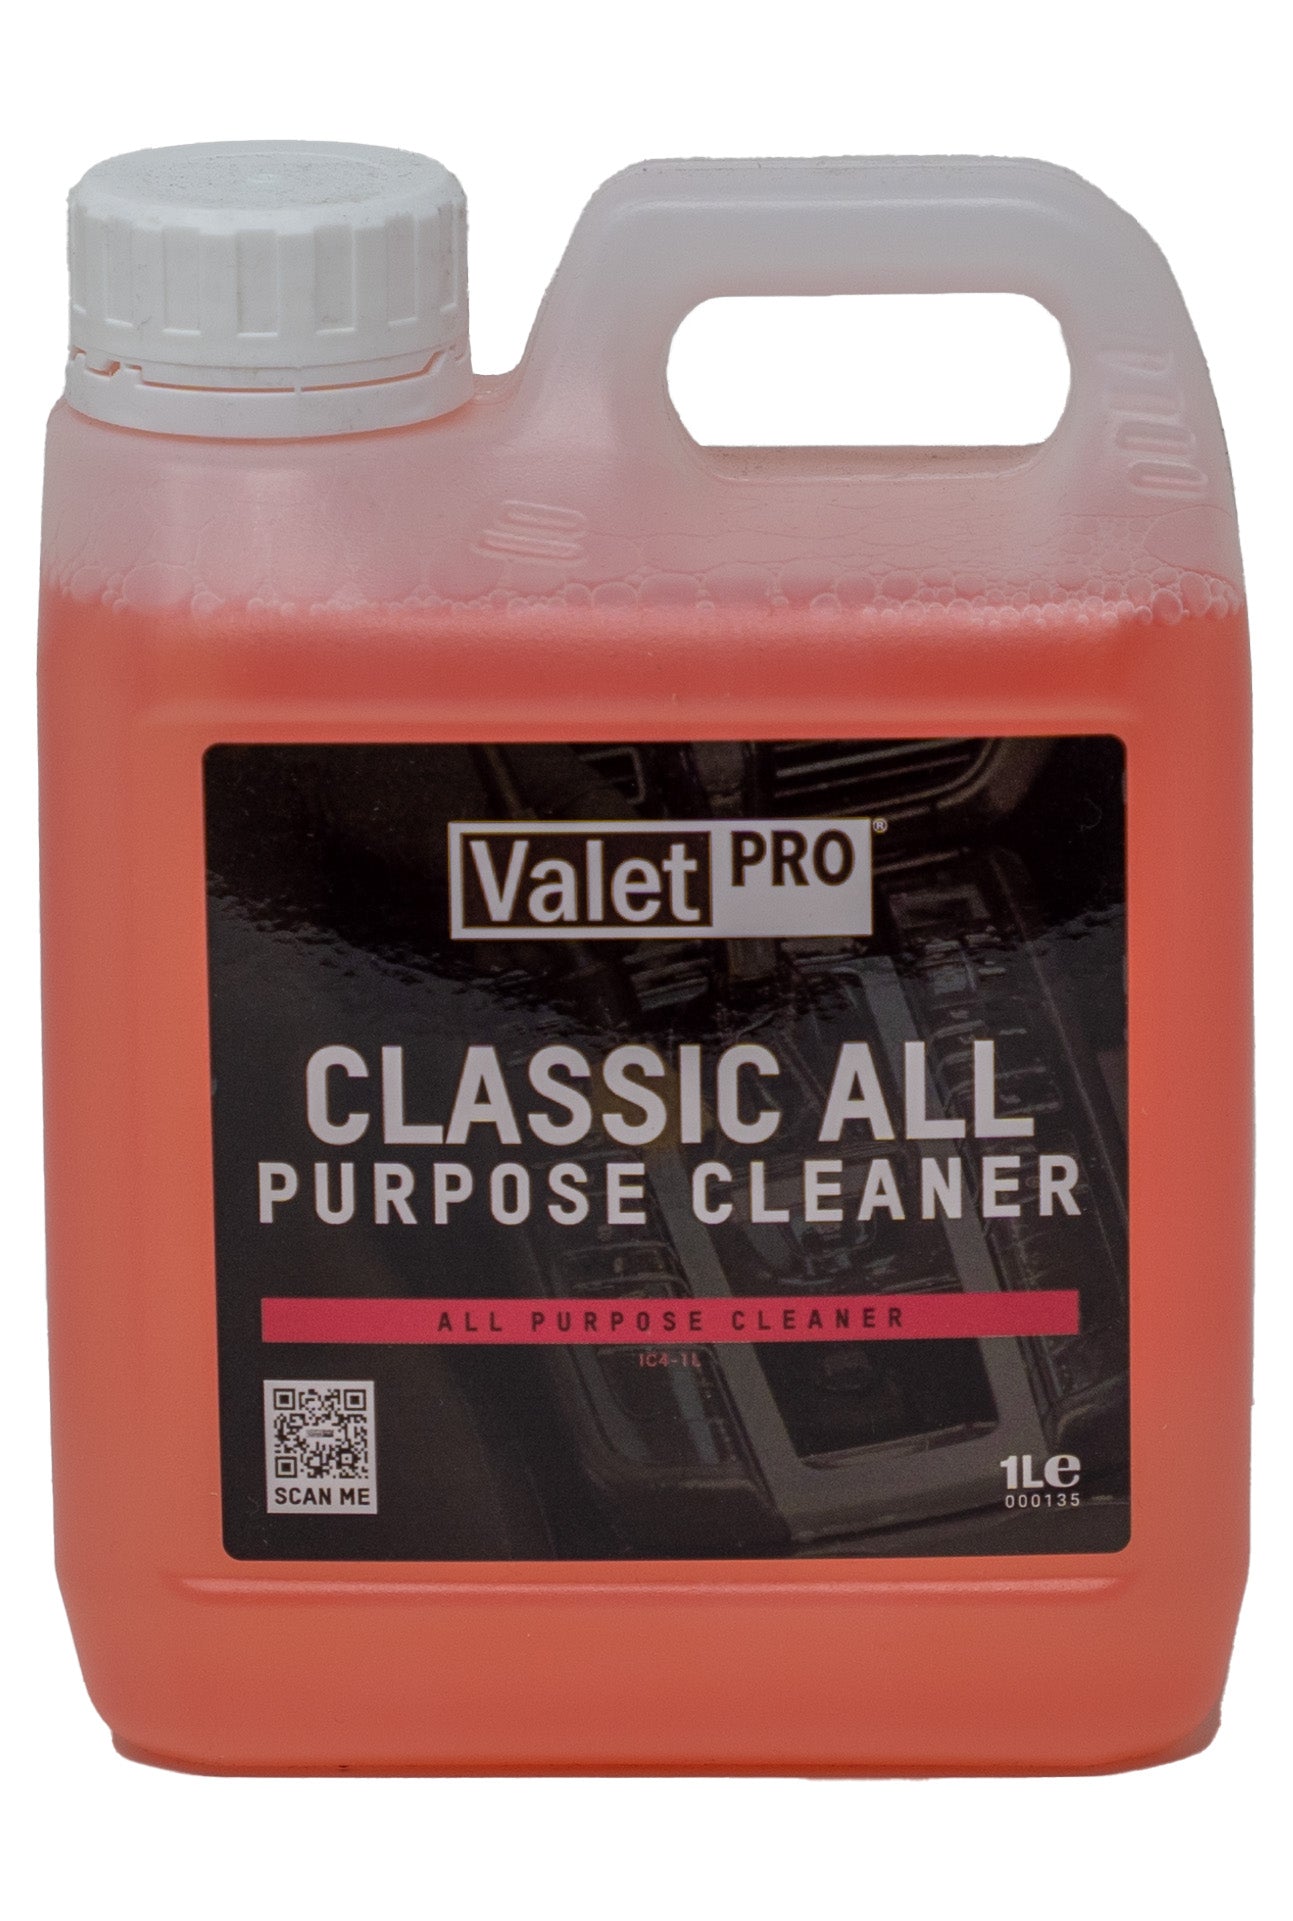 ValetPRO Classic All Purpose Cleaner 1 Litre